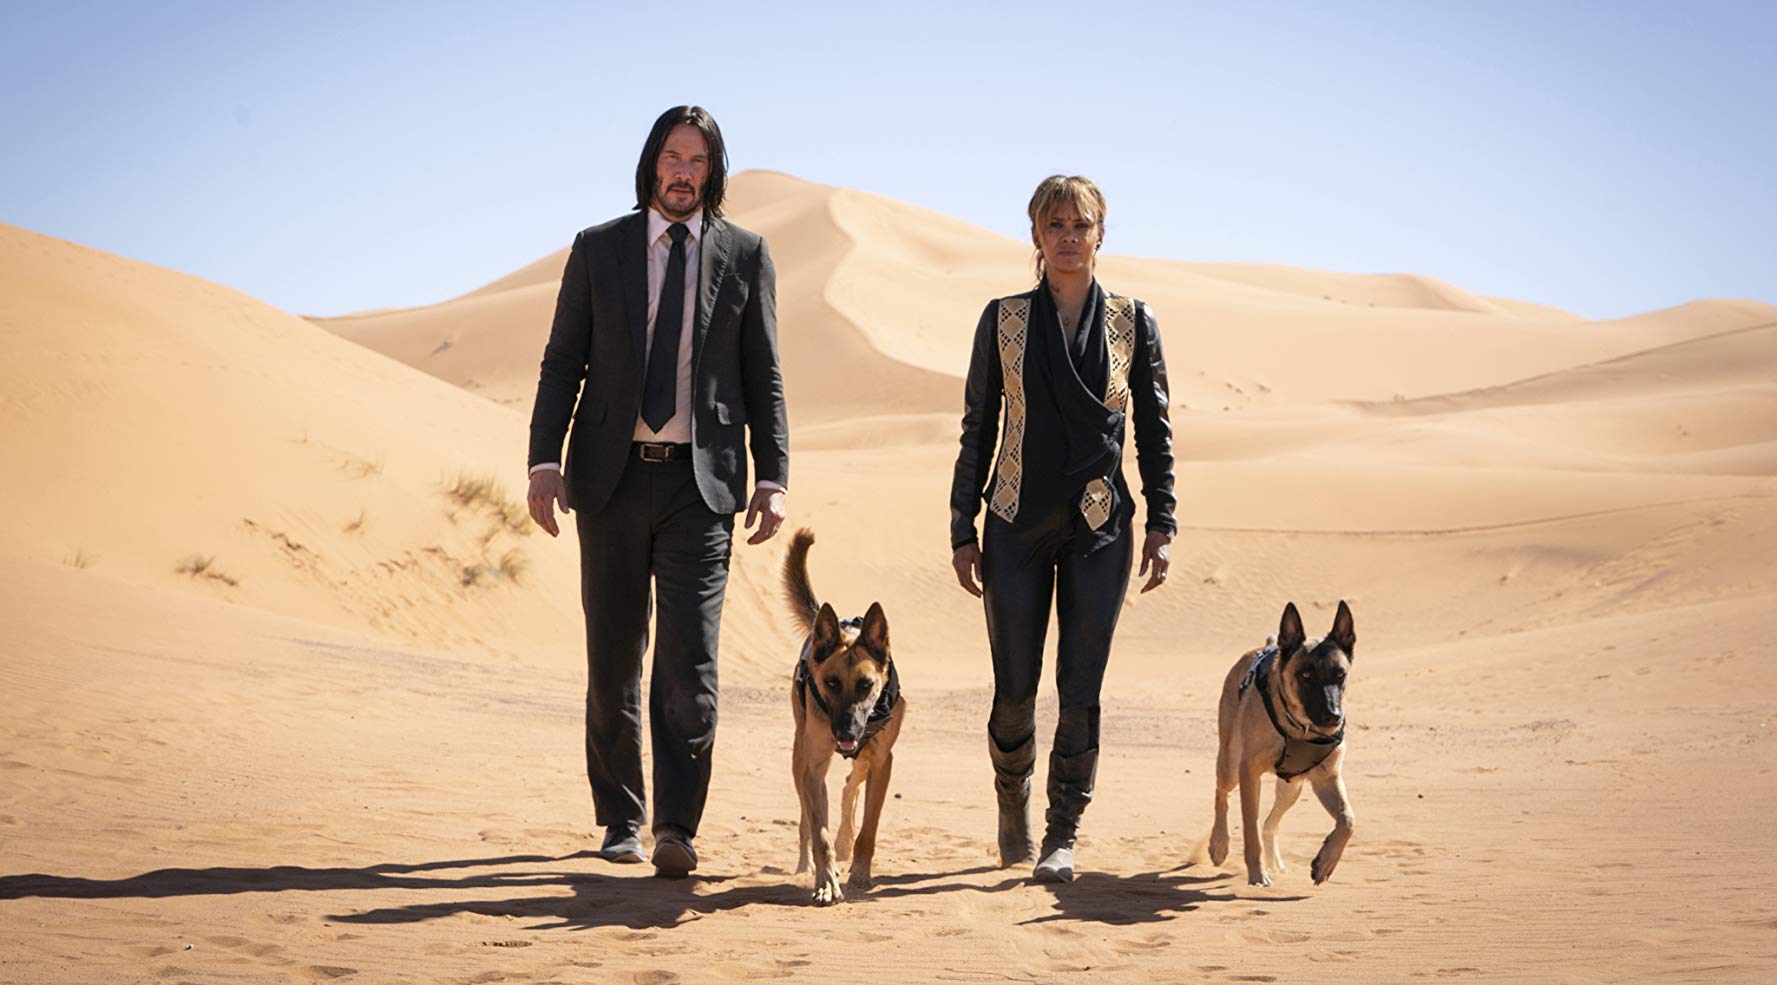 Is John Wick Based on a True Story? Release Date and Plot - News